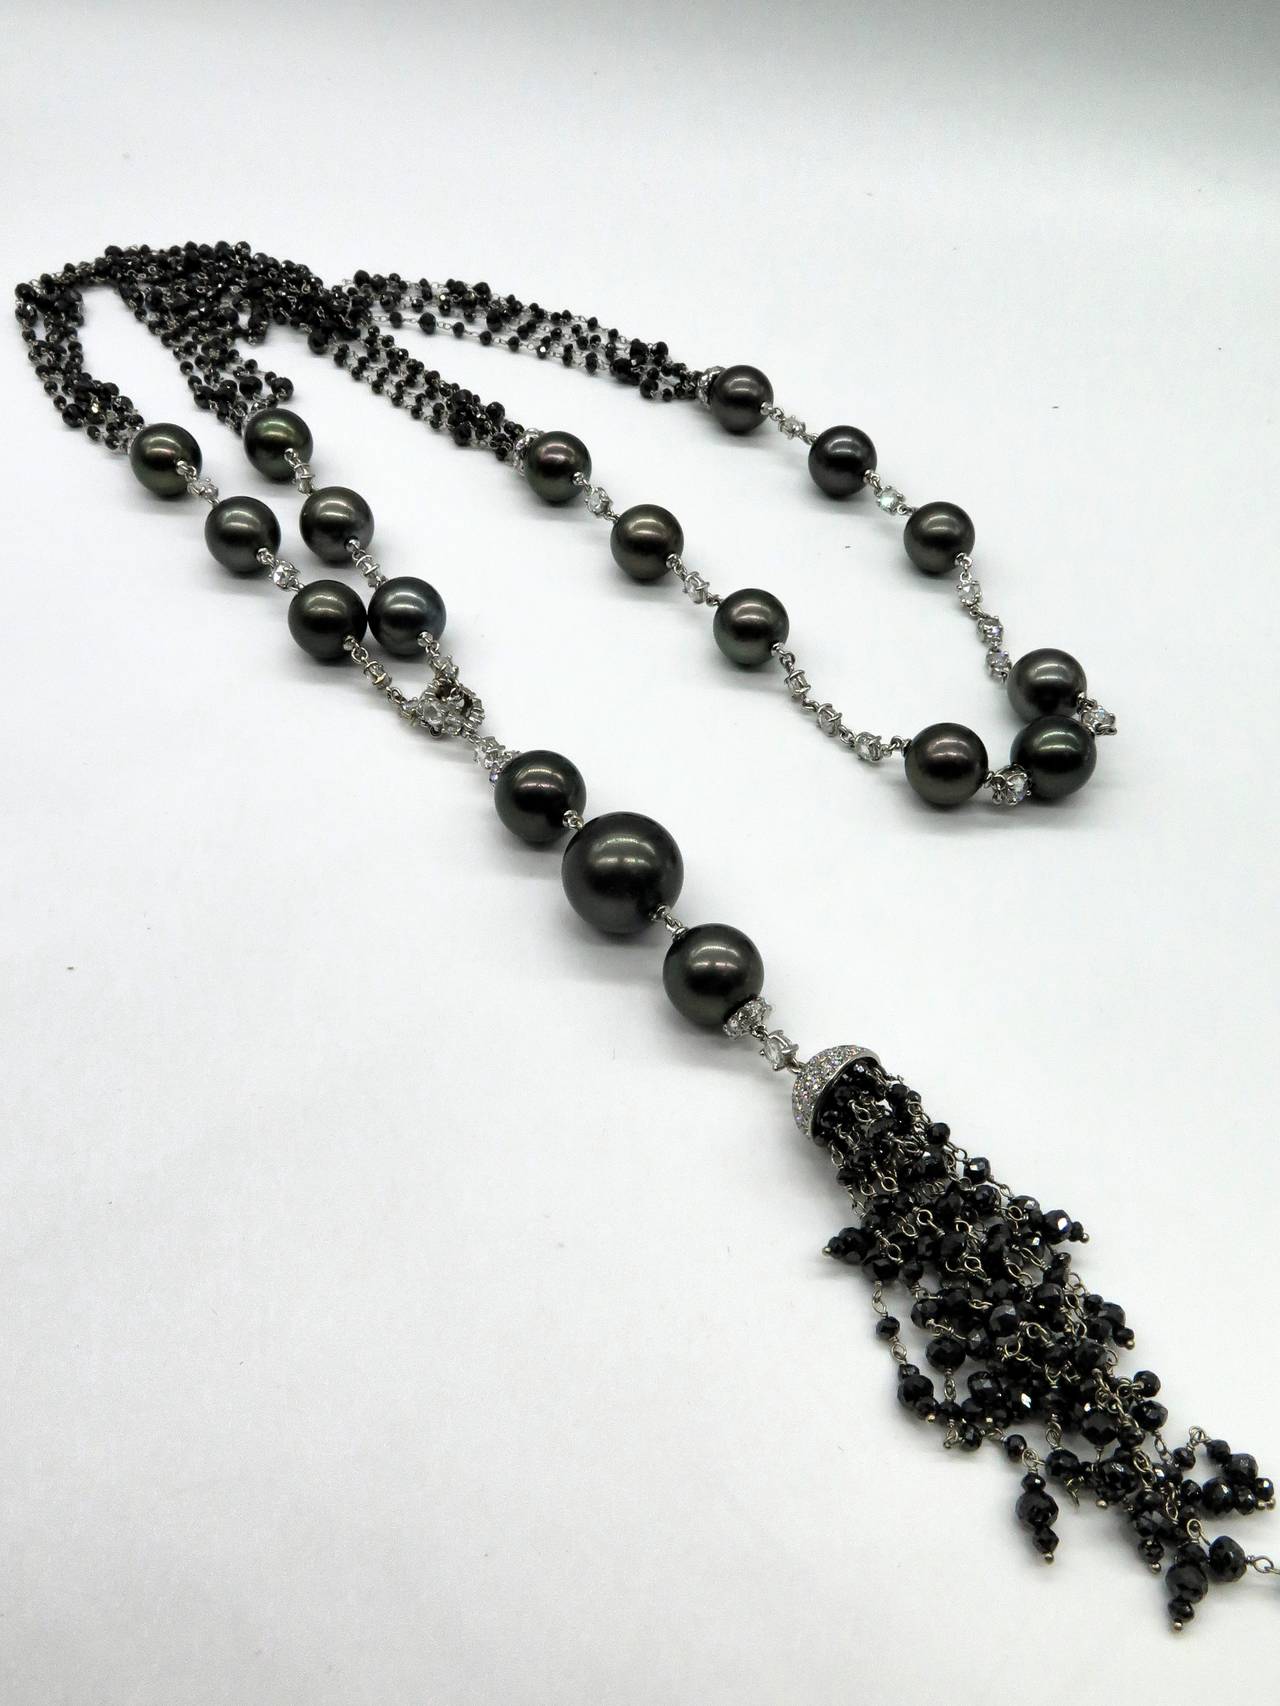 Absolutely magnificent natural black diamonds and white diamond tassel necklace with black Tahitian pearls. The black diamonds beads weighs approx. 19.55cts and the white diamonds weighs approx. 10.20cts. The white diamonds are G-H color and VS